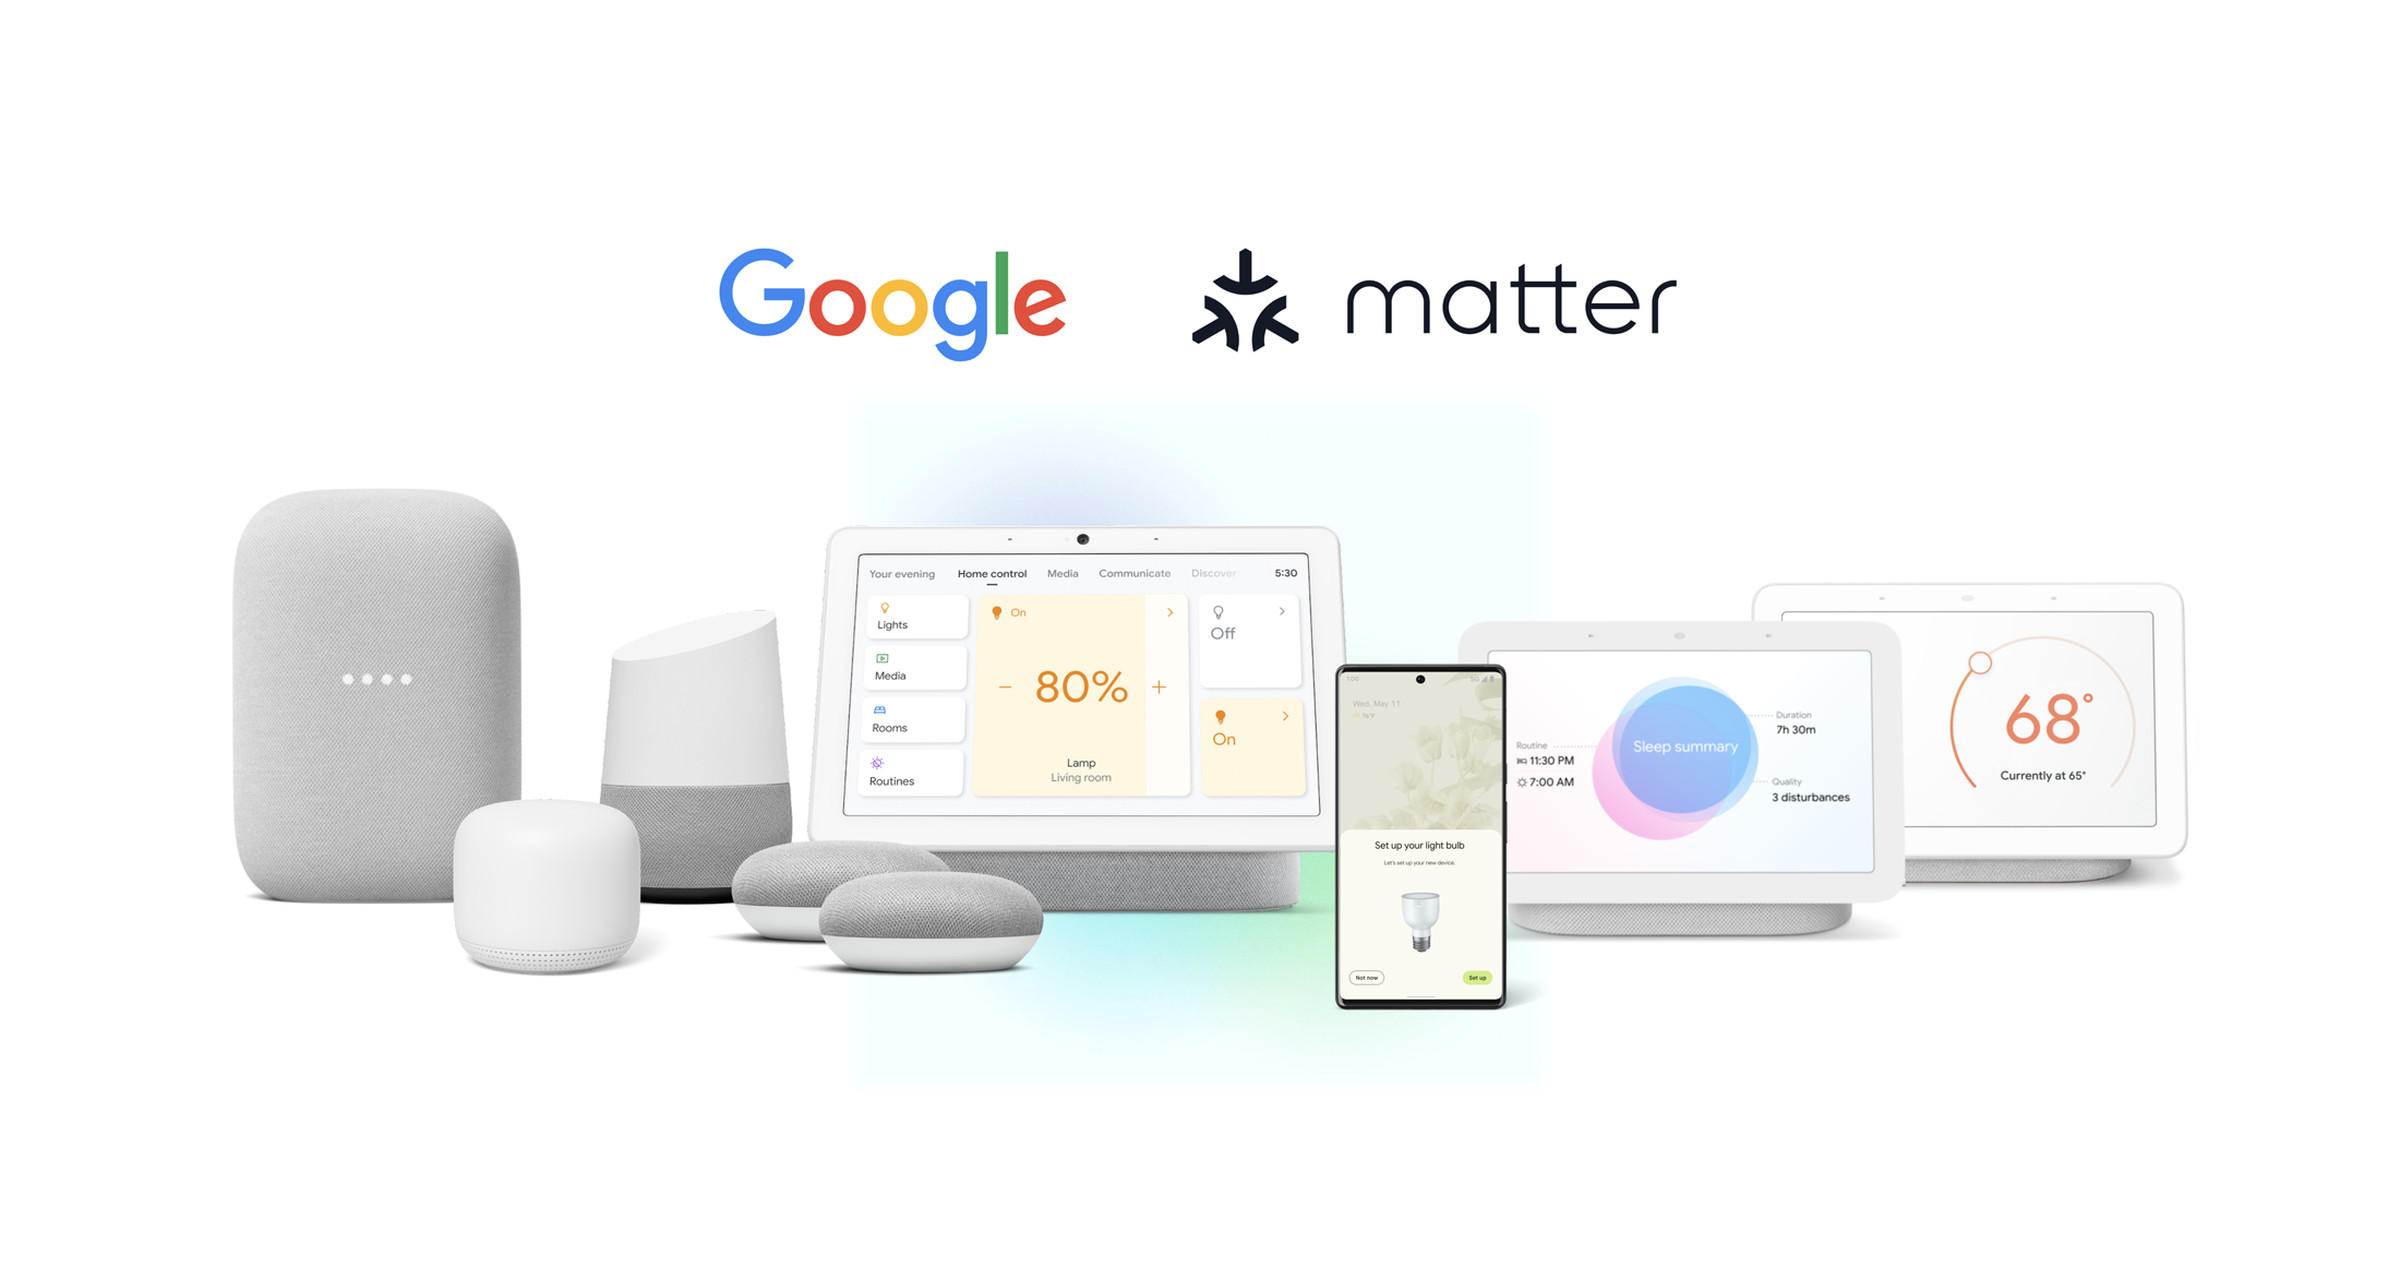 Google announced that all its Nest smart speakers and displays will be upgraded to be Matter controllers. Some, including the Nest Hub Max, Nest Hub (2nd gen), and its Nest Wifi routers will also be Thread border routers. 